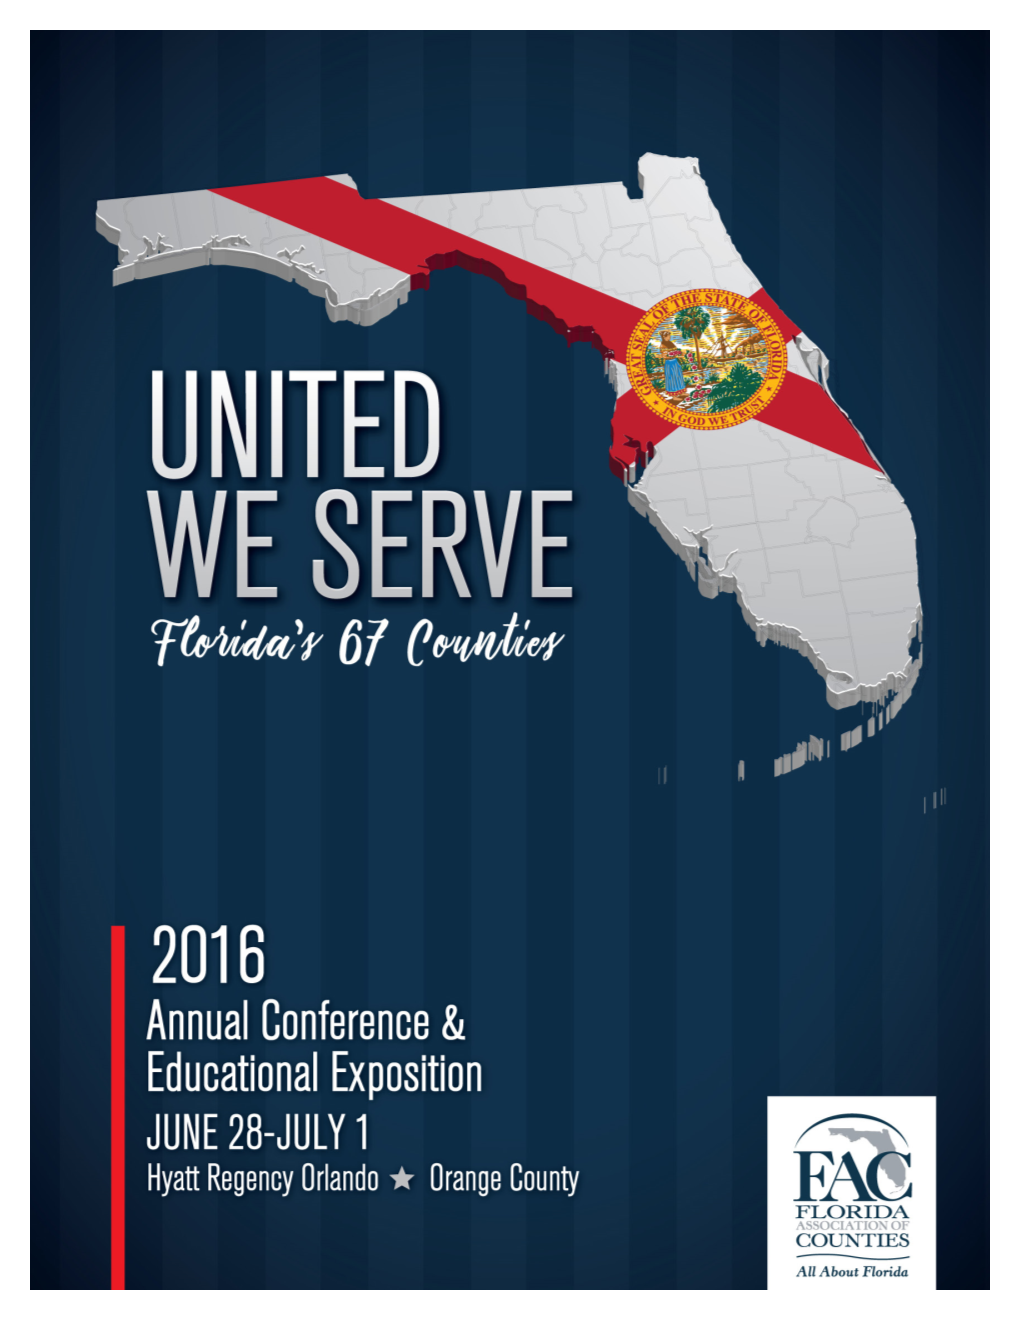 The Florida Association of Counties' 2016 Annual Conference & Educational Exposition